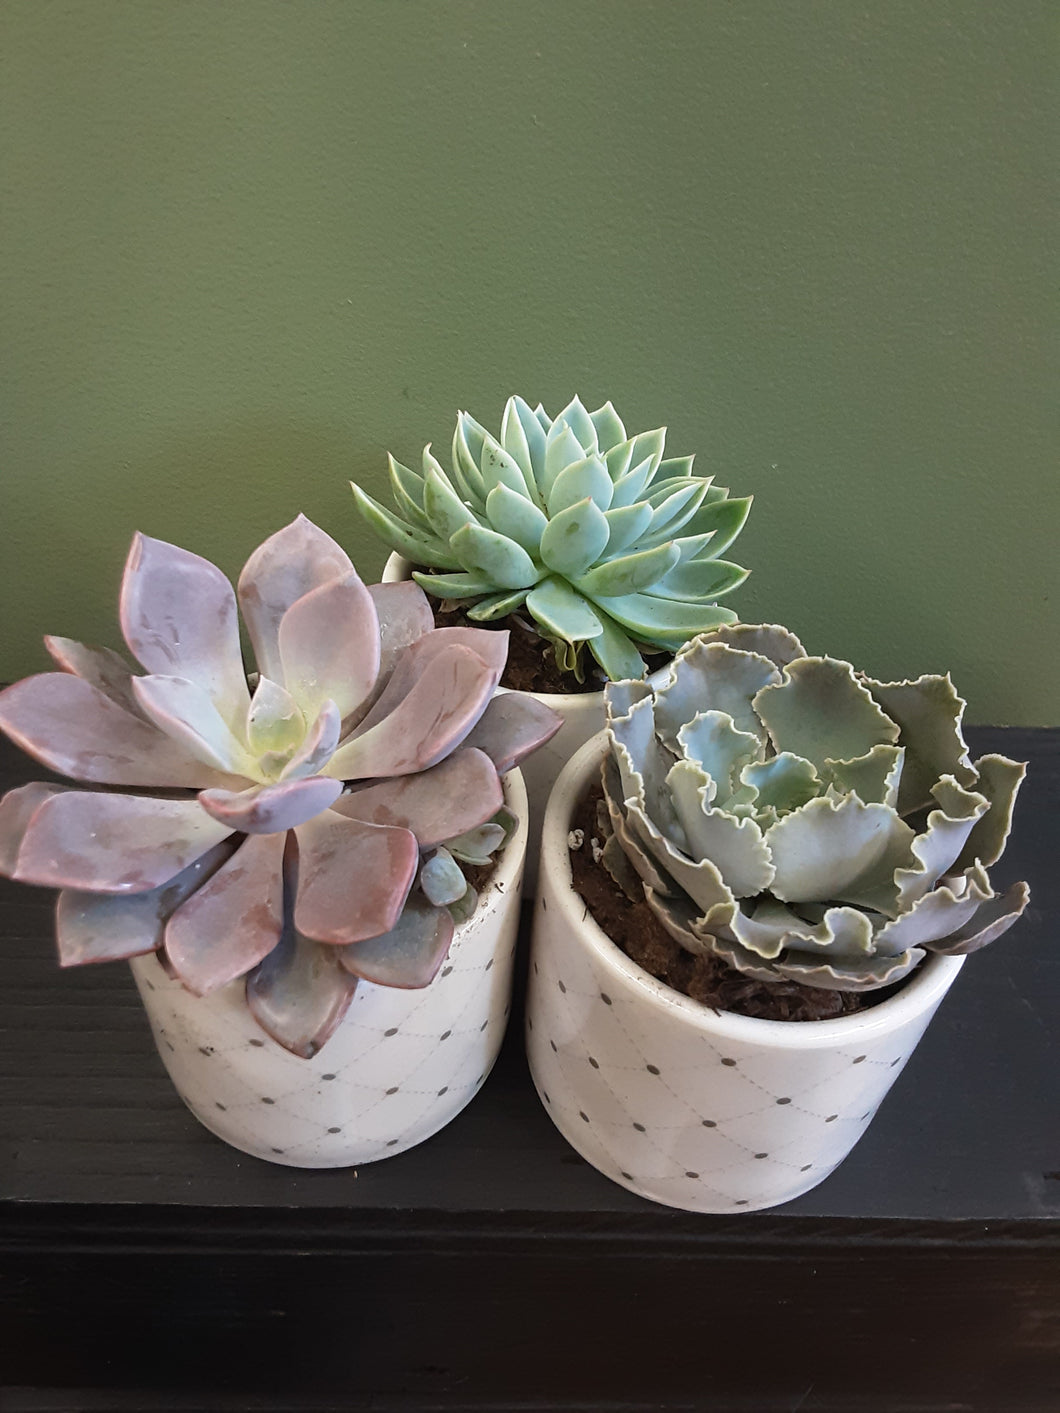 Succulent in Polk-a-dot Container